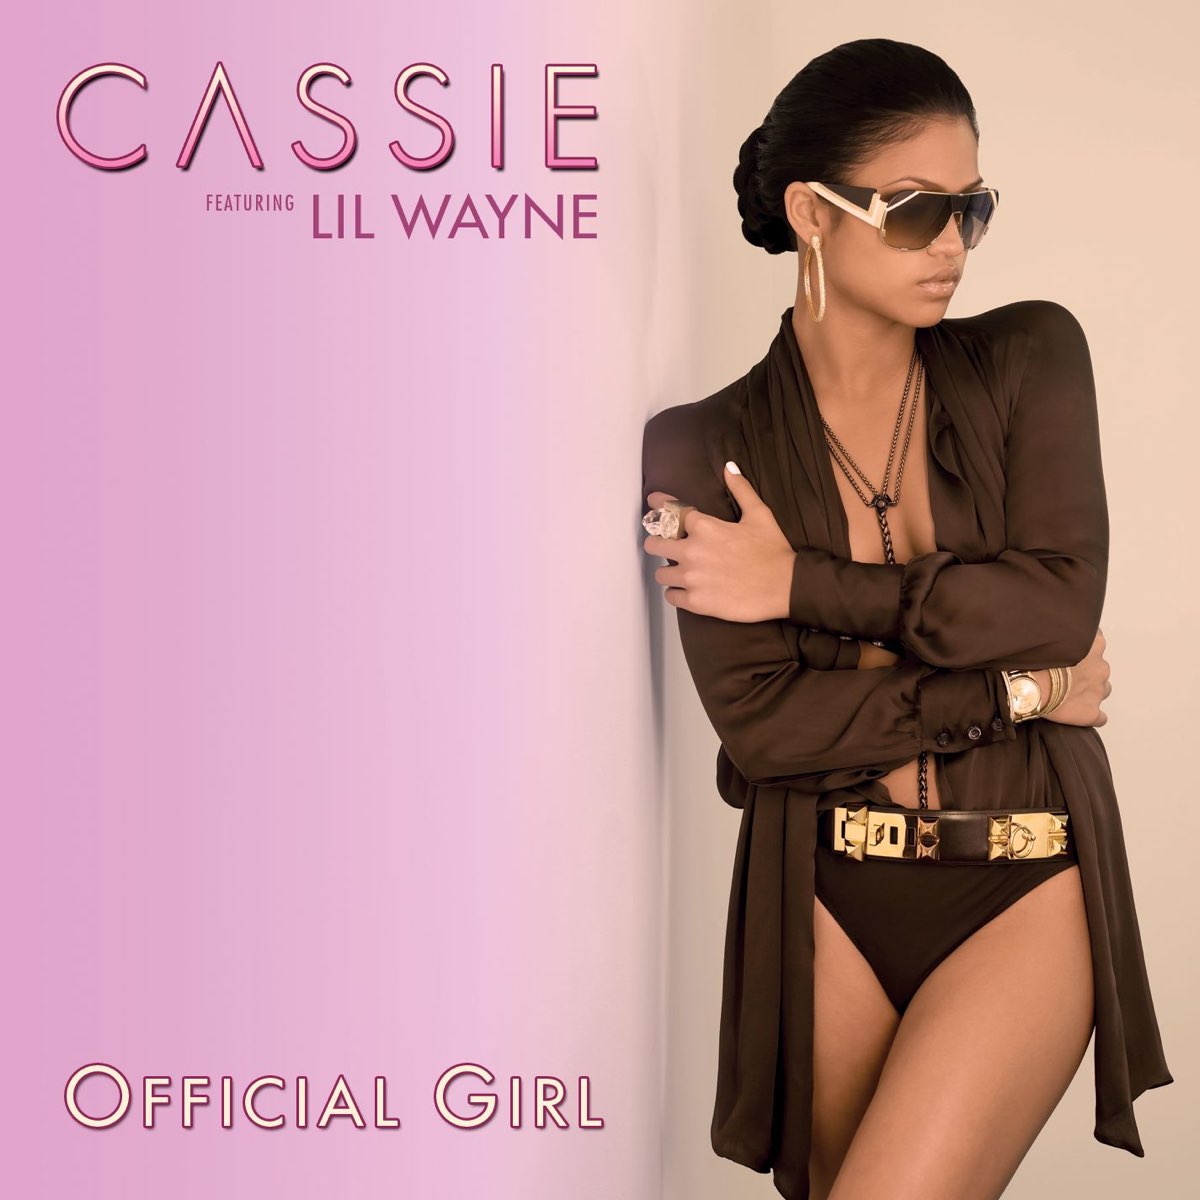 Cassie featuring Lil Wayne — Official Girl cover artwork